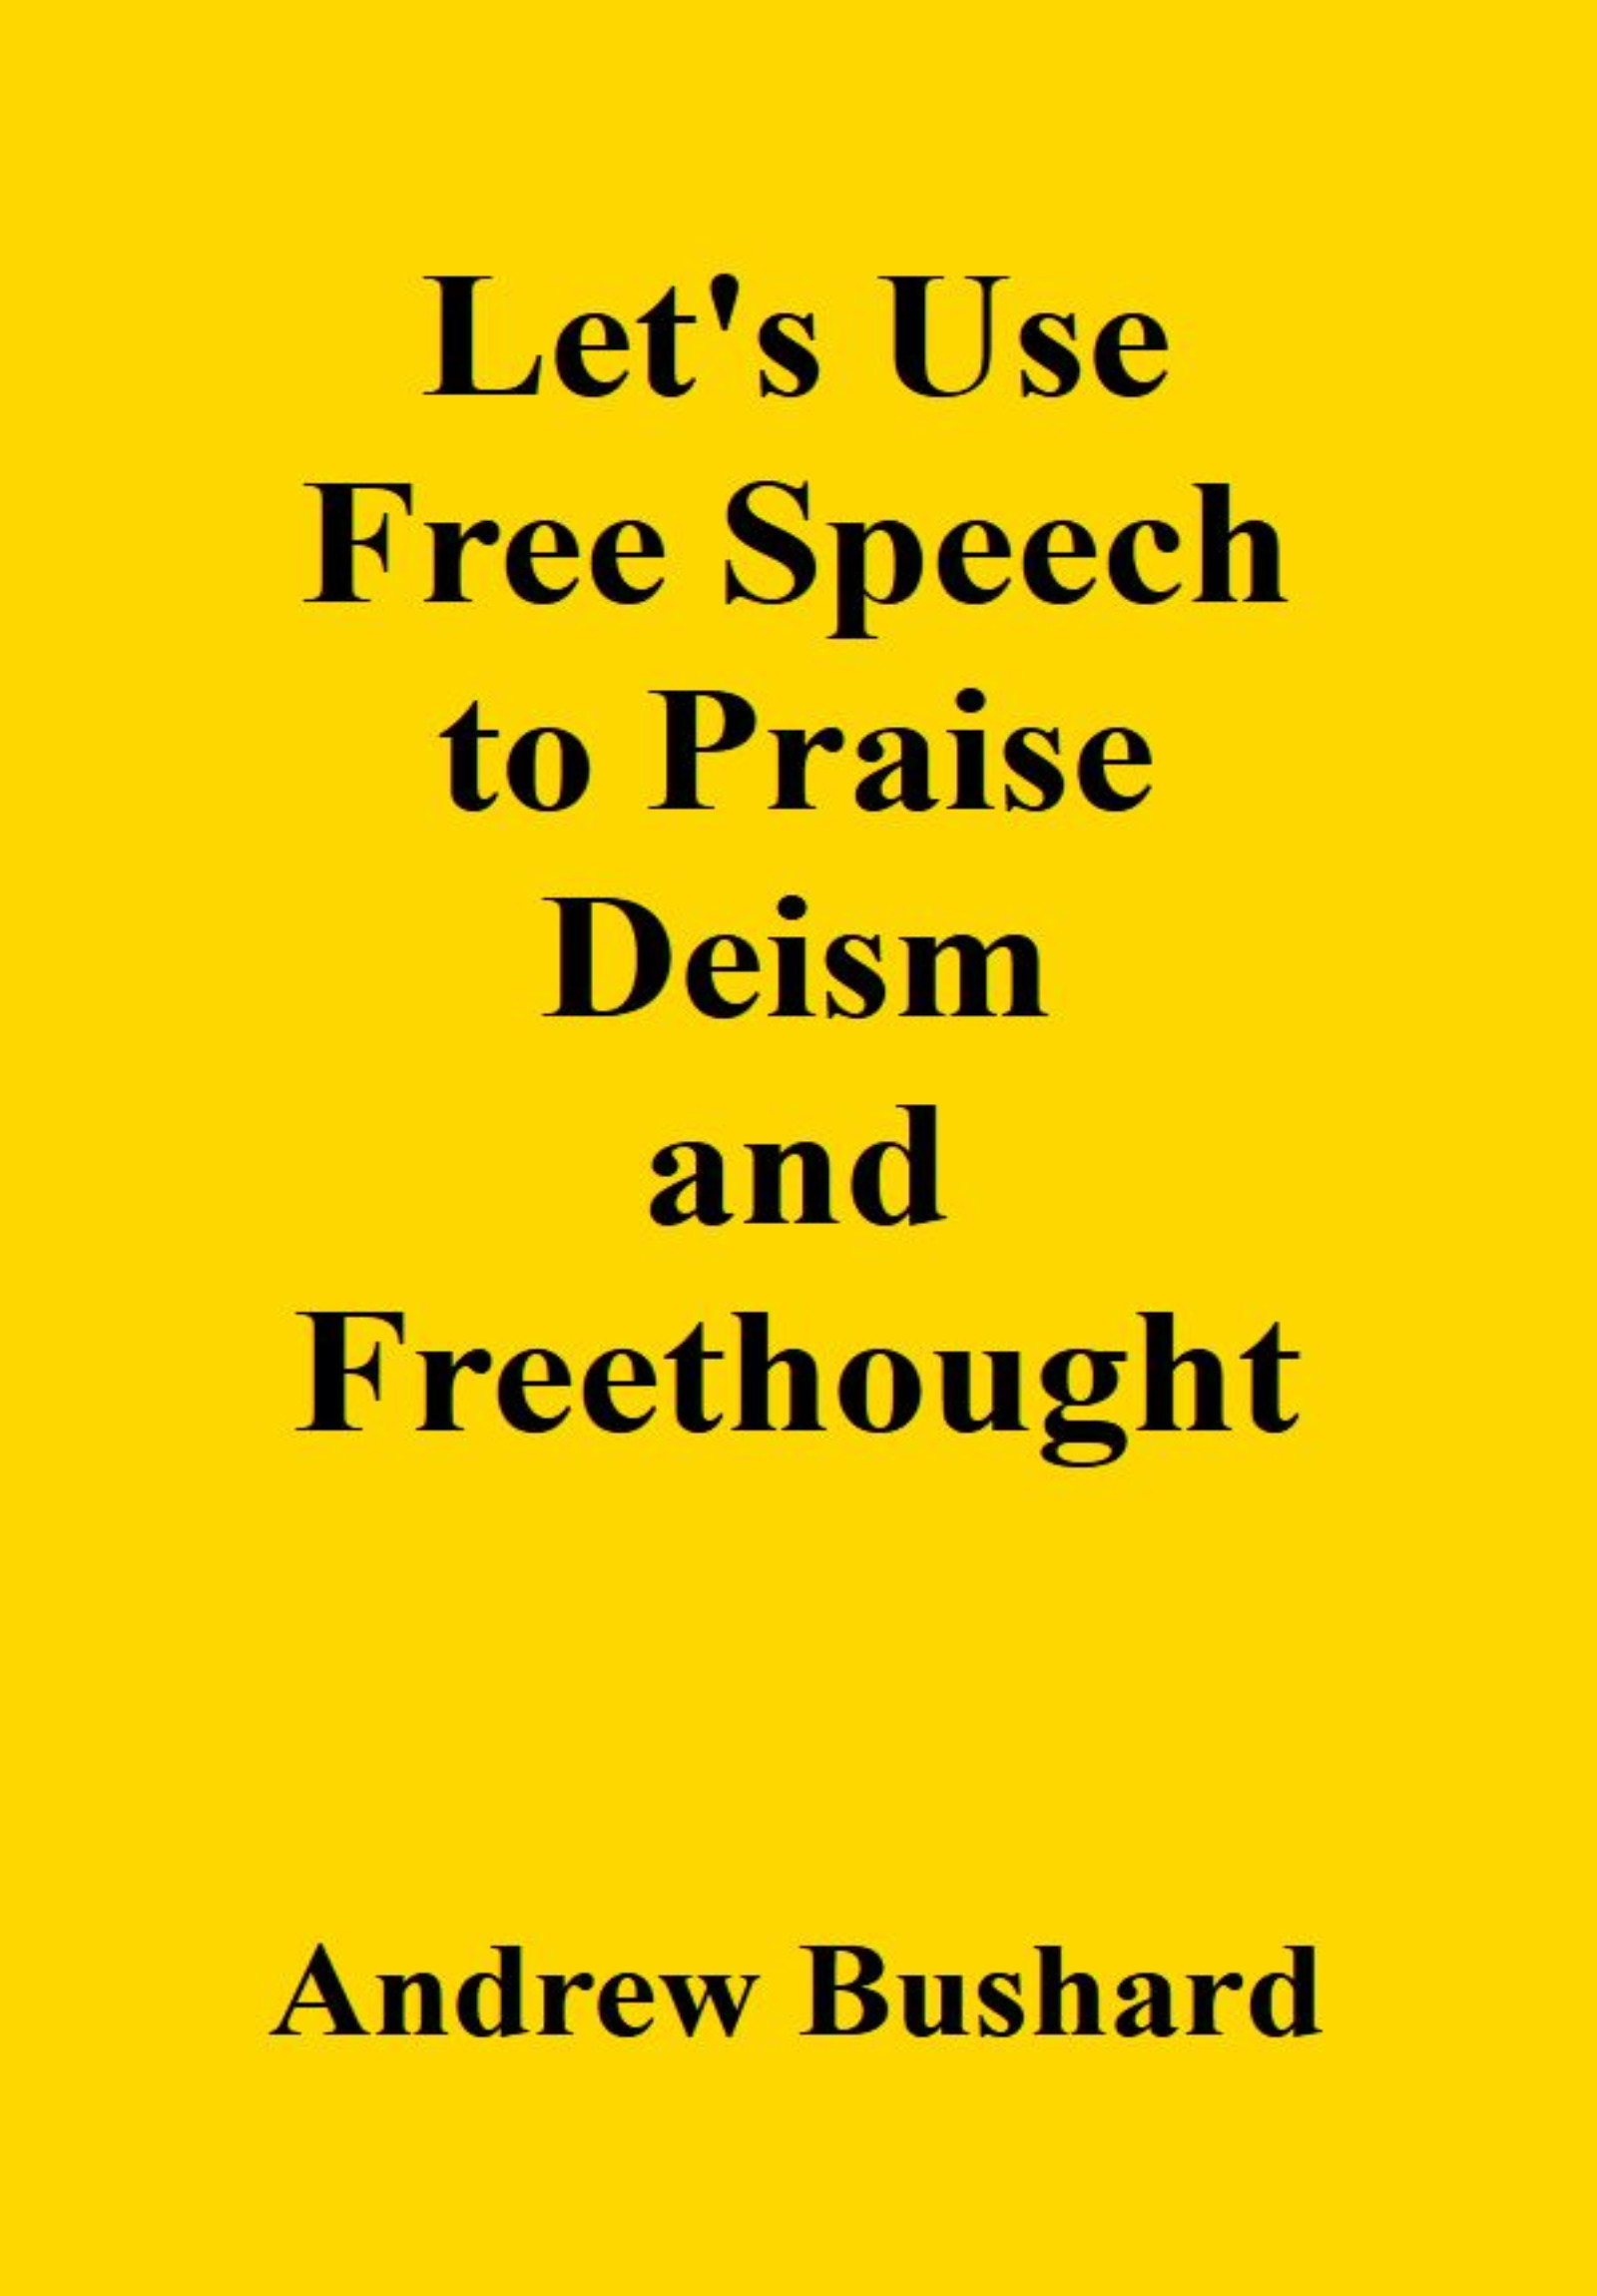 Let's Use Free Speech to Praise Deism and Freethought (Arabic)'s featured image